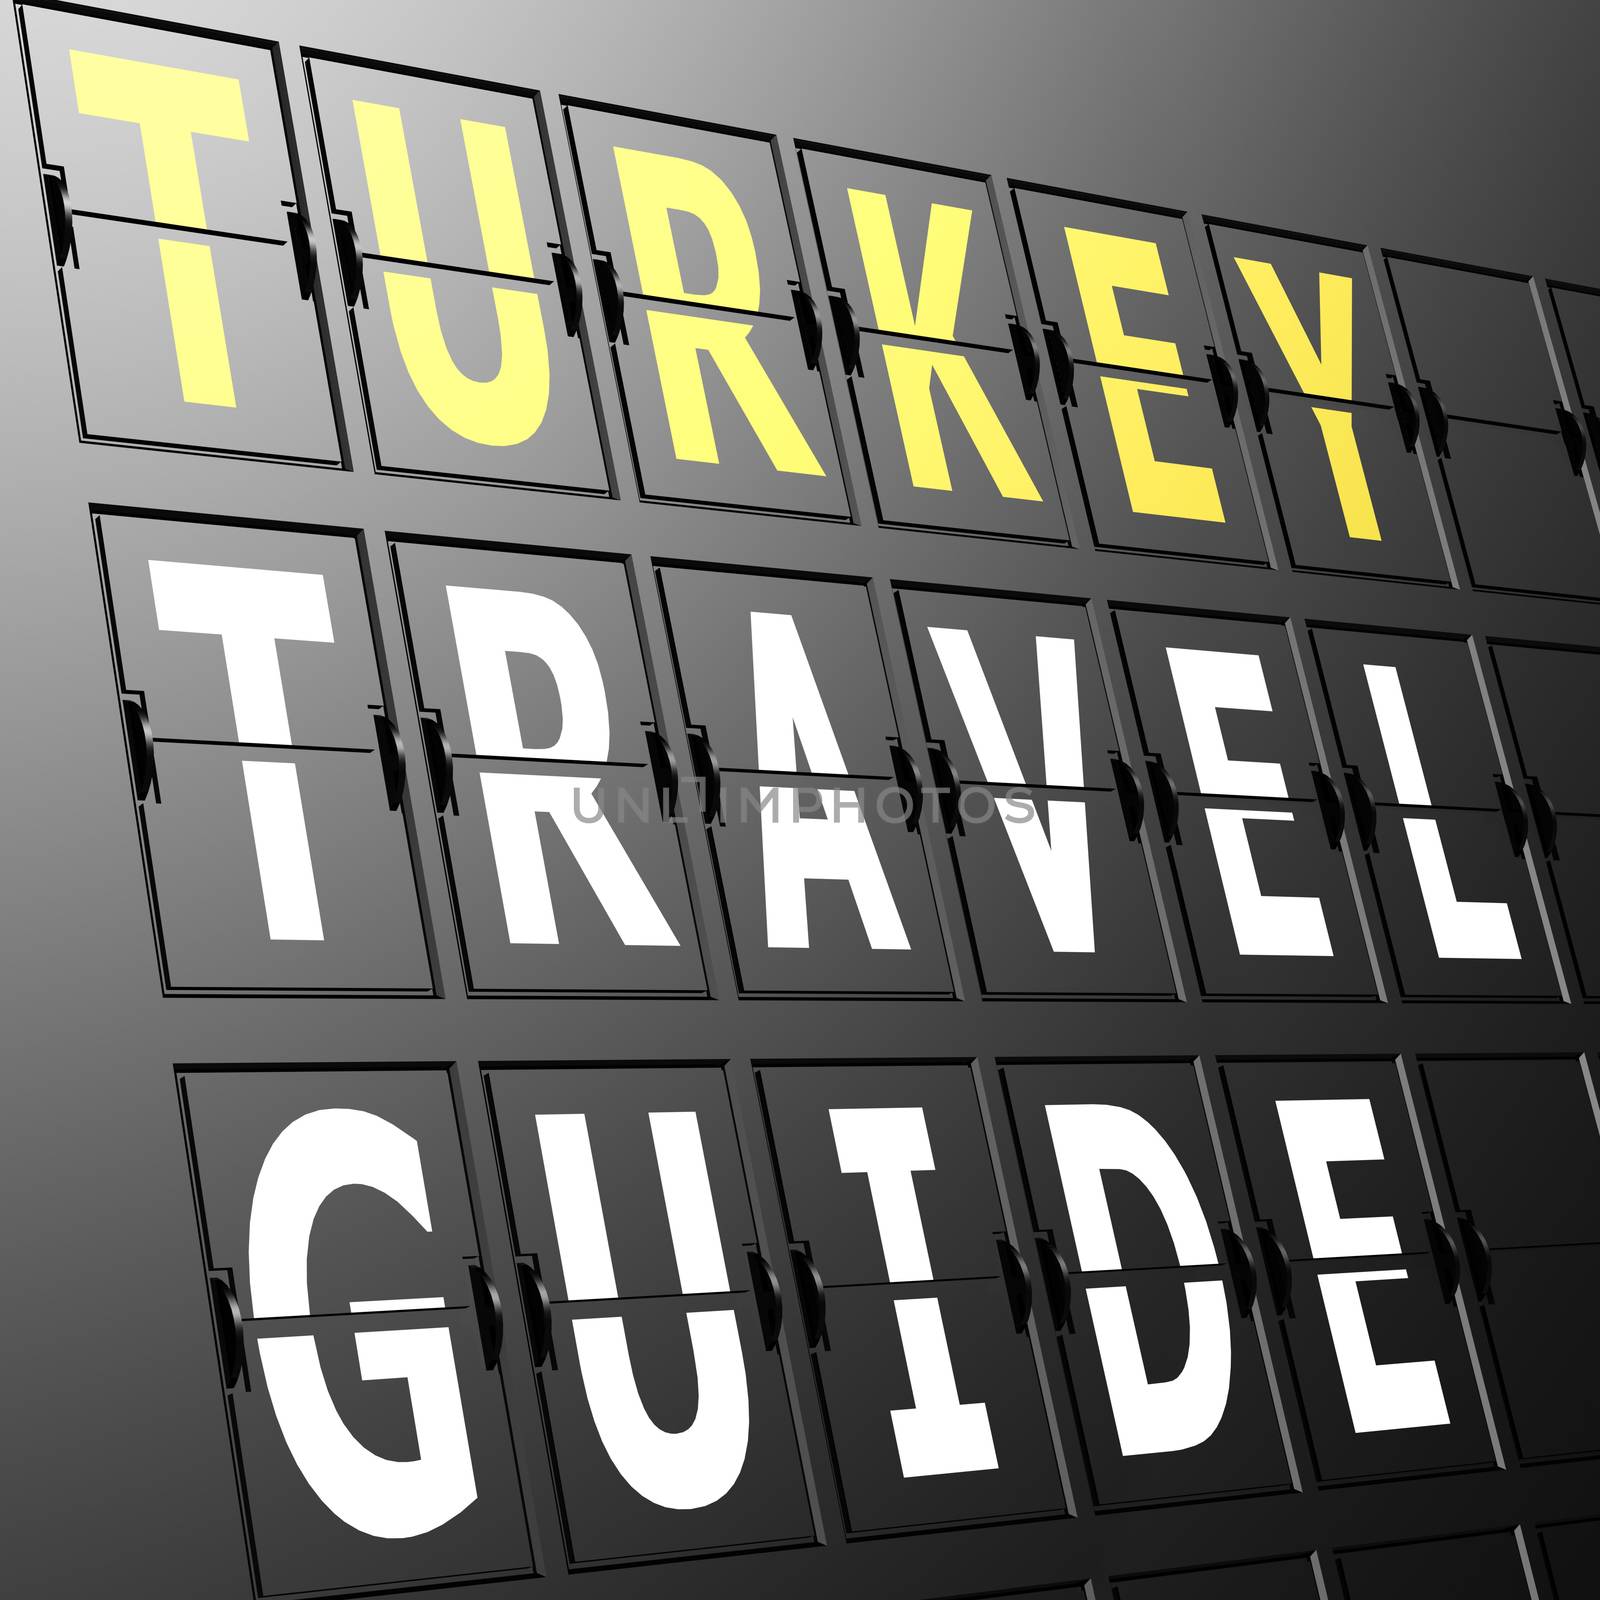 Airport display Turkey travel guide